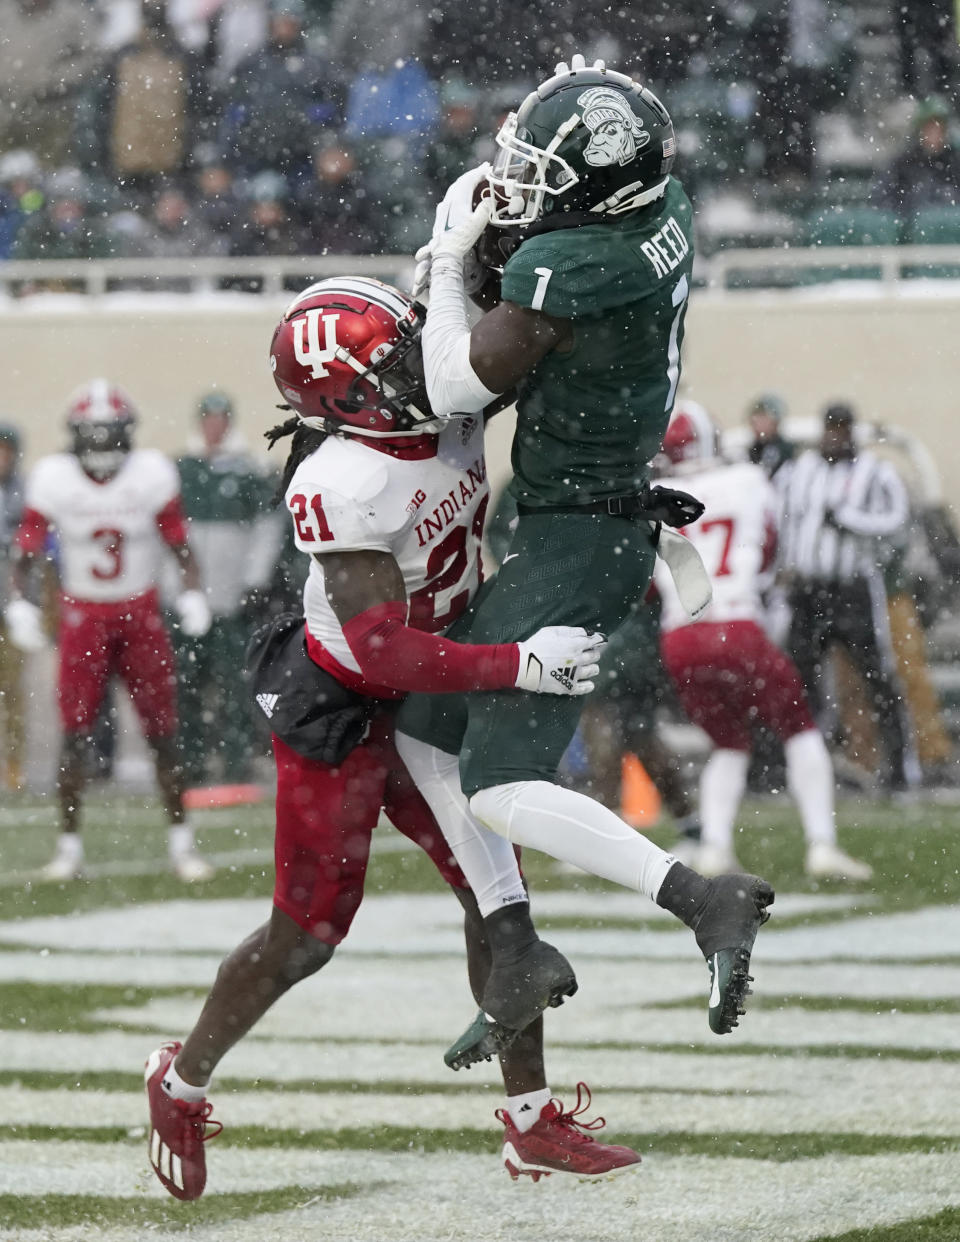 Indiana defensive back Noah Pierre (21) pushes Michigan State wide receiver Jayden Reed (1) out of bounds during the second overtime of an NCAA college football game, Saturday, Nov. 19, 2022, in East Lansing, Mich. (AP Photo/Carlos Osorio)